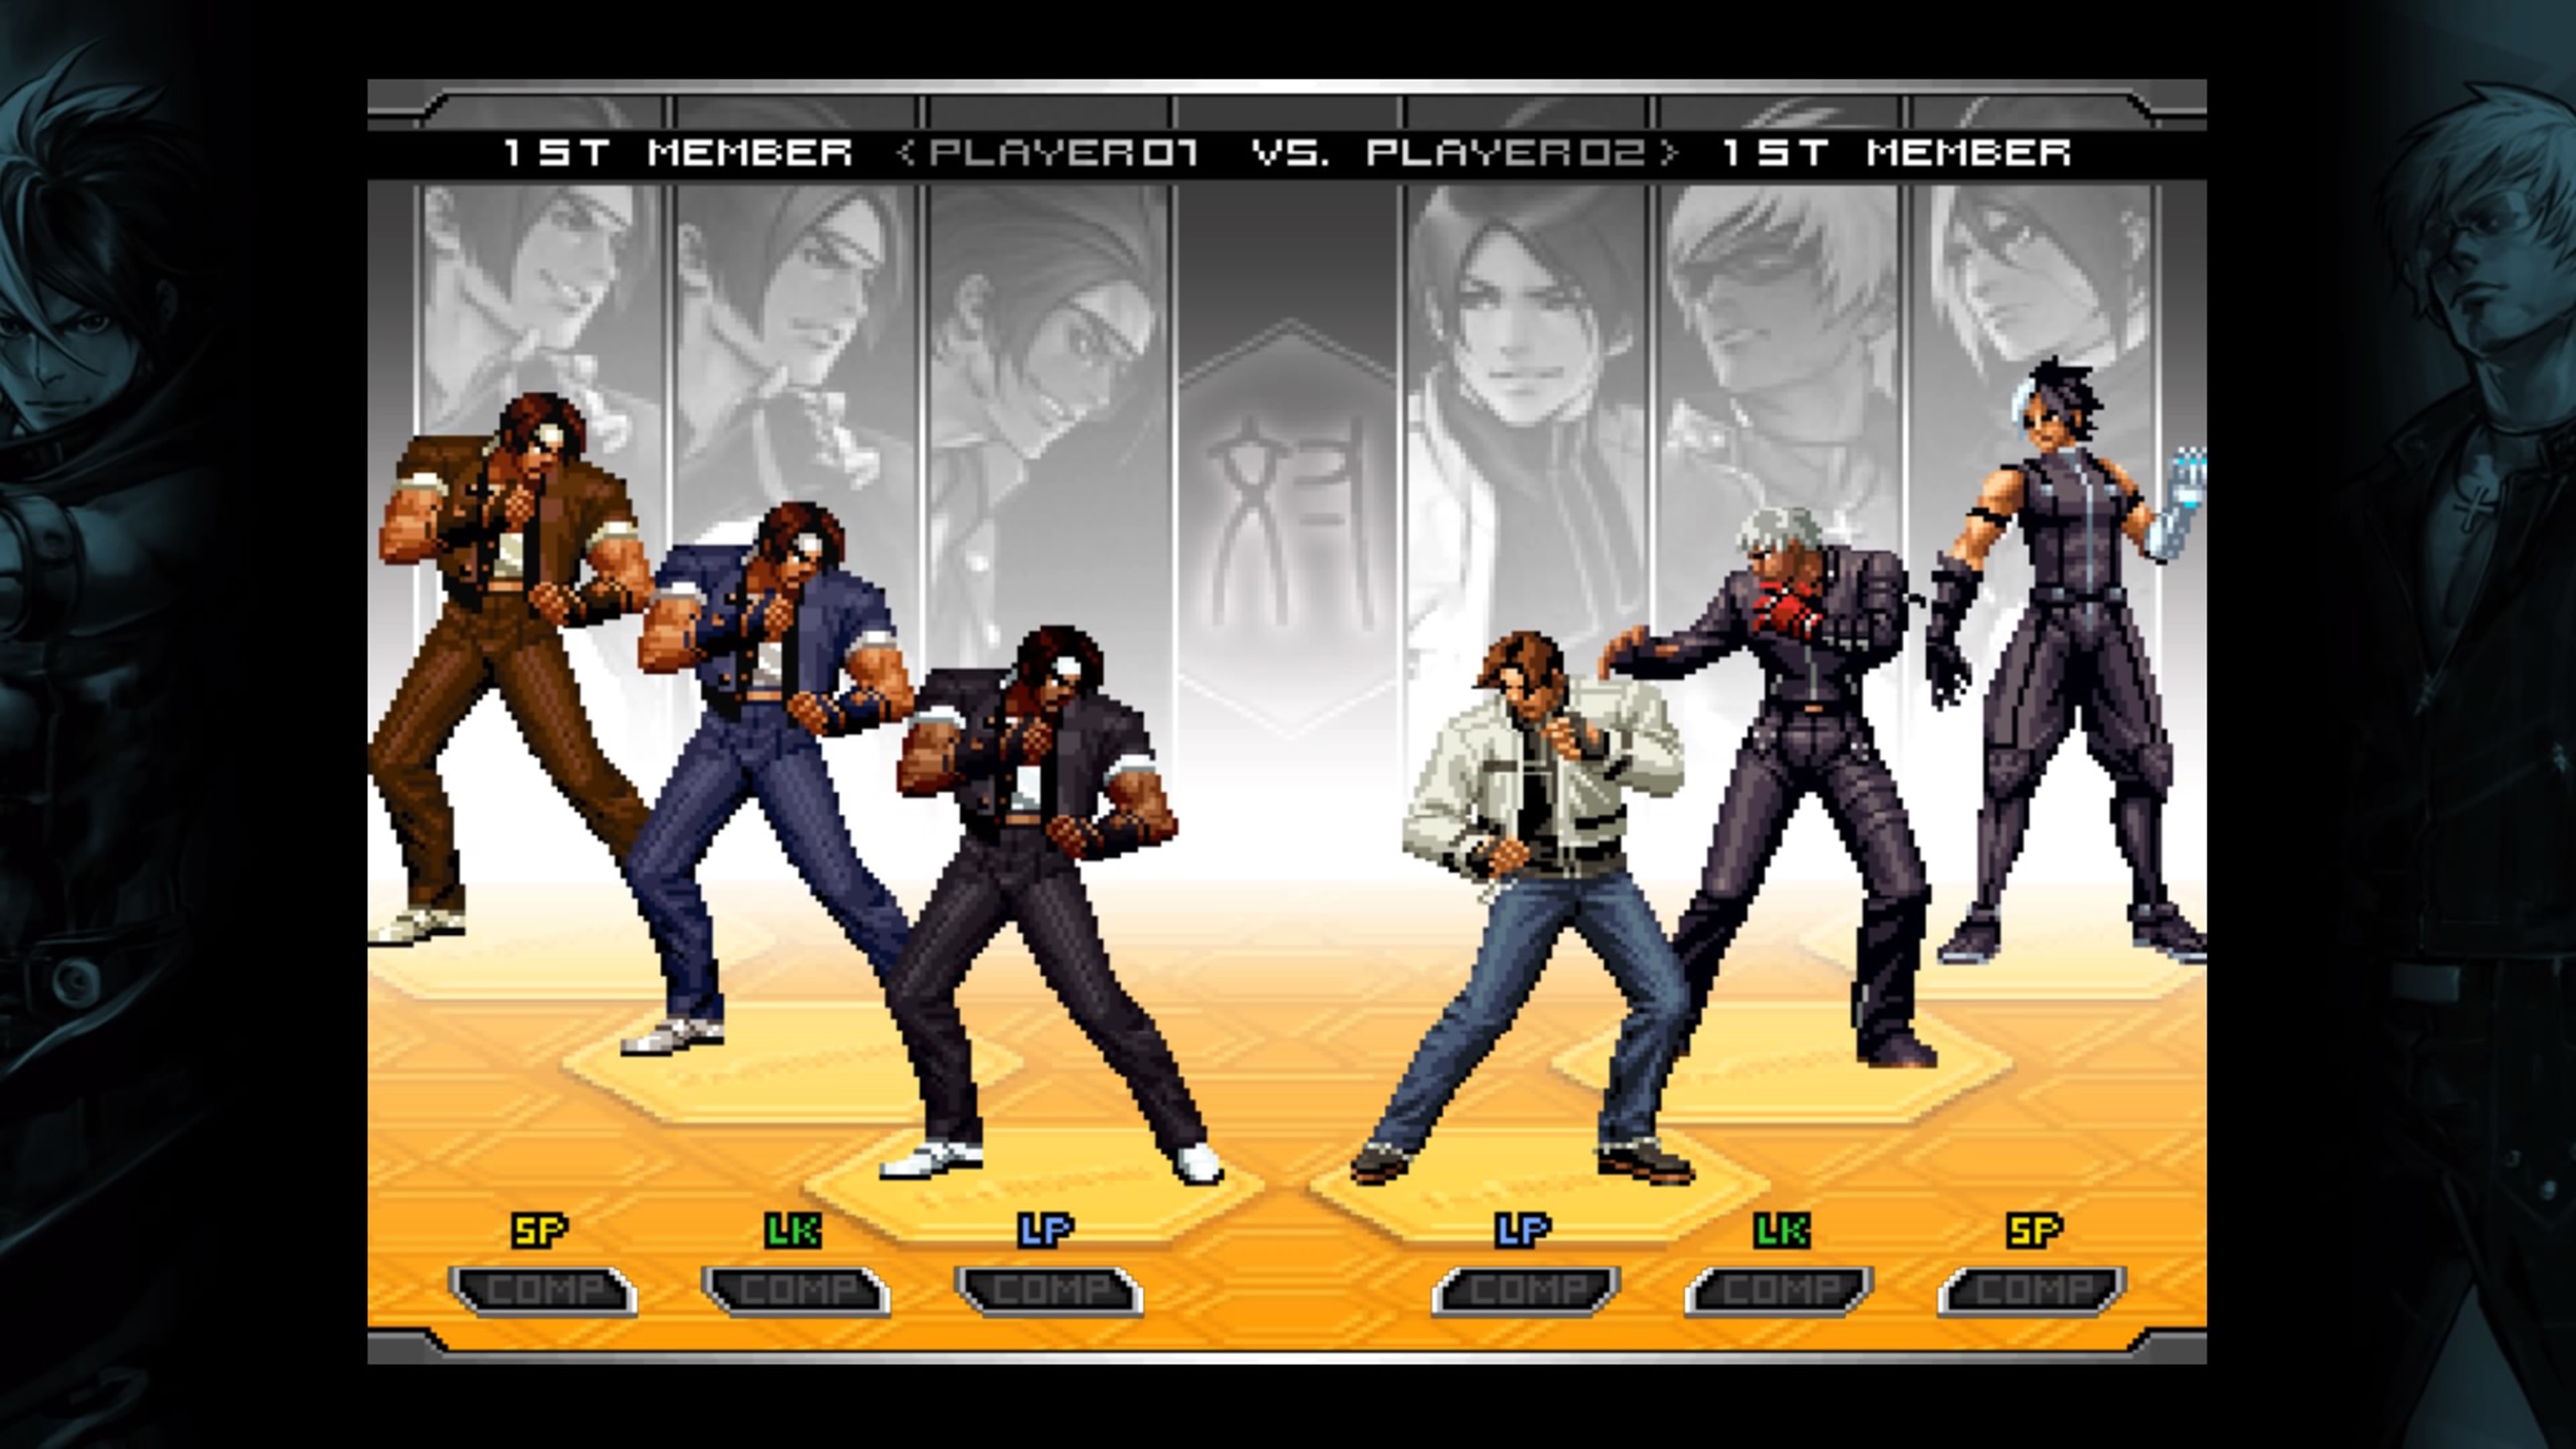 The King Of Fighters 2002 Unlimited Match para Playstation 4 – Mil